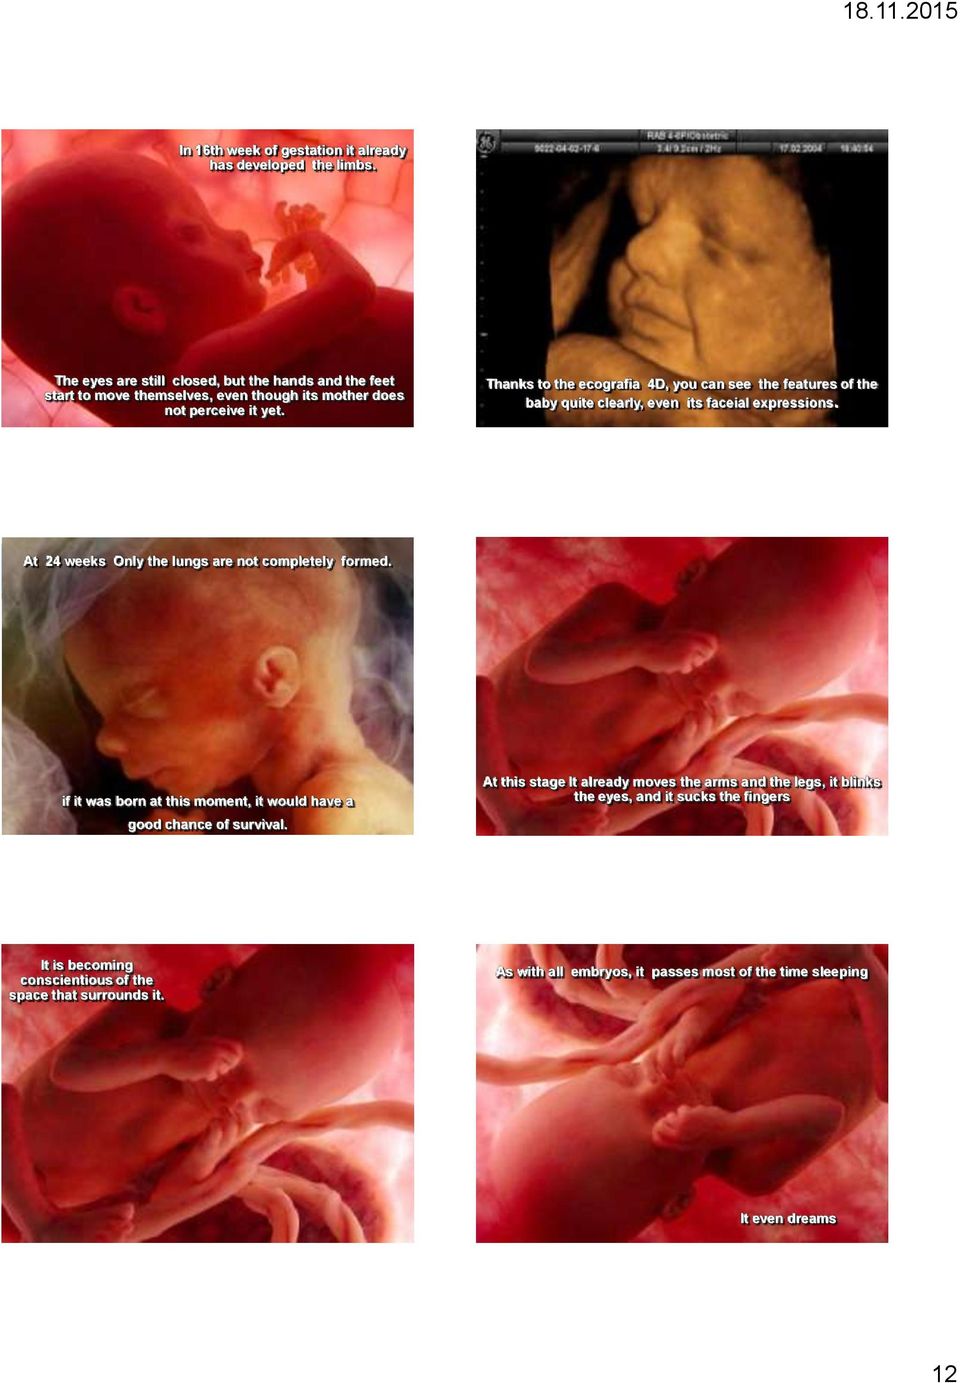 Thanks to the ecografia 4D, you can see the features of the baby quite clearly, even its faceial expressions. At 24 weeks Only the lungs are not completely formed.